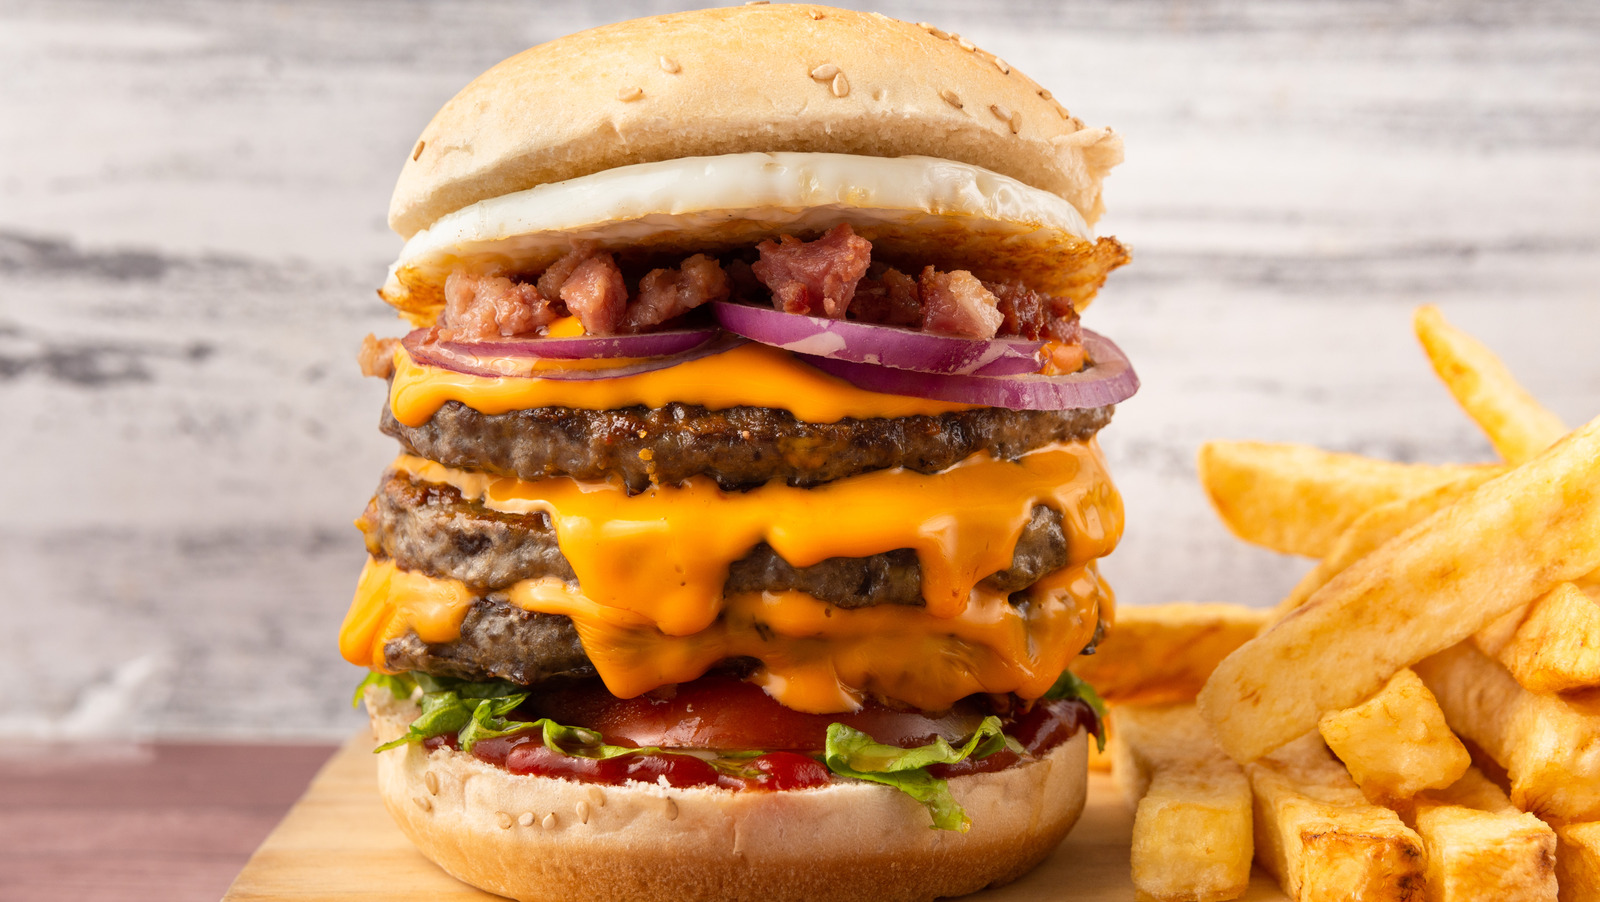 The Most Unhealthy Burgers At Popular Fast Food Chains